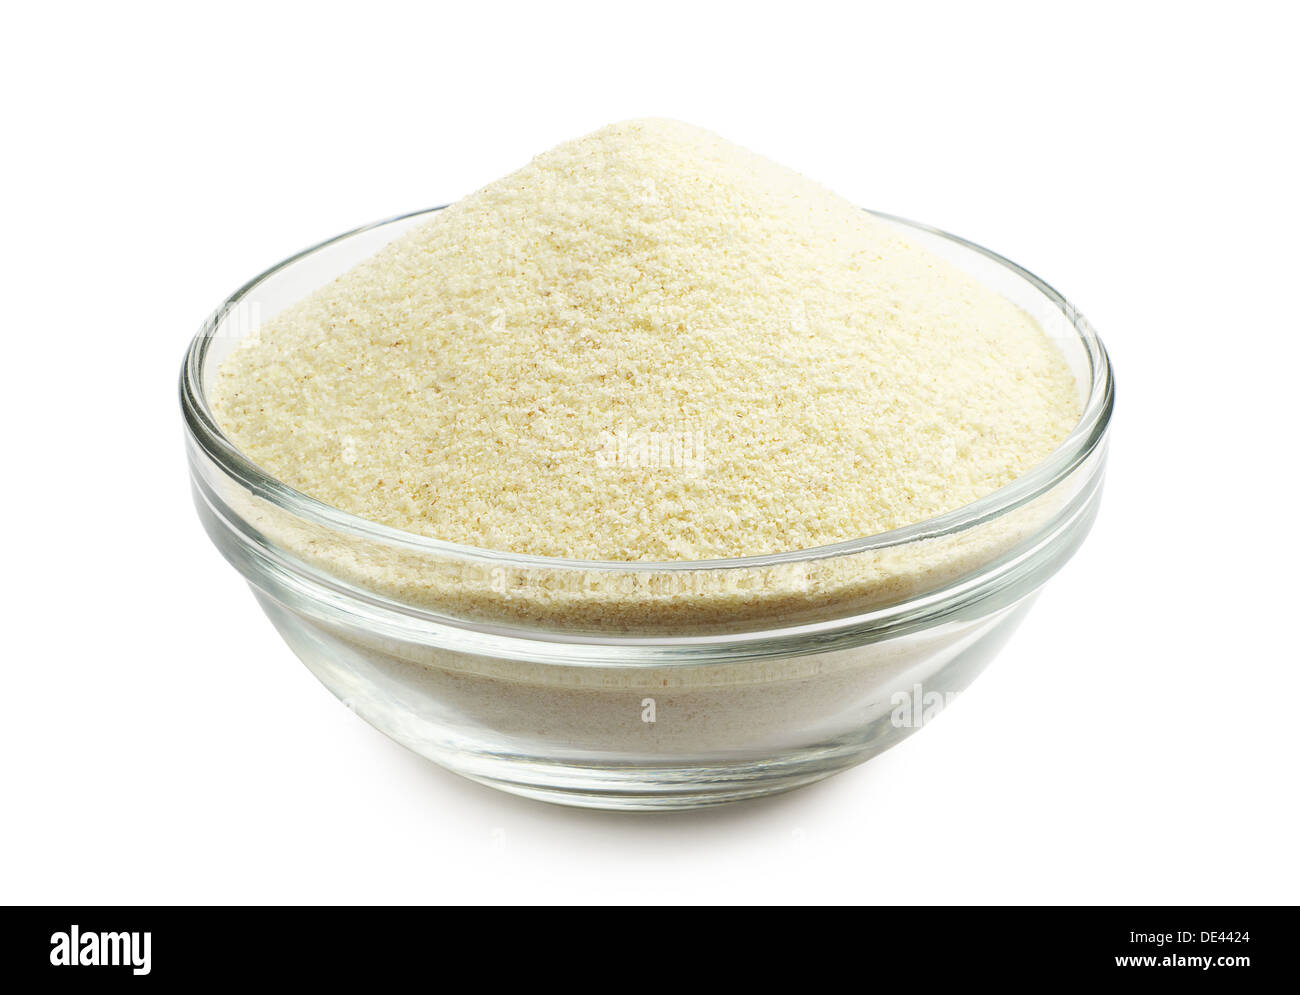 Semolina in a glass bowl on a white background Stock Photo